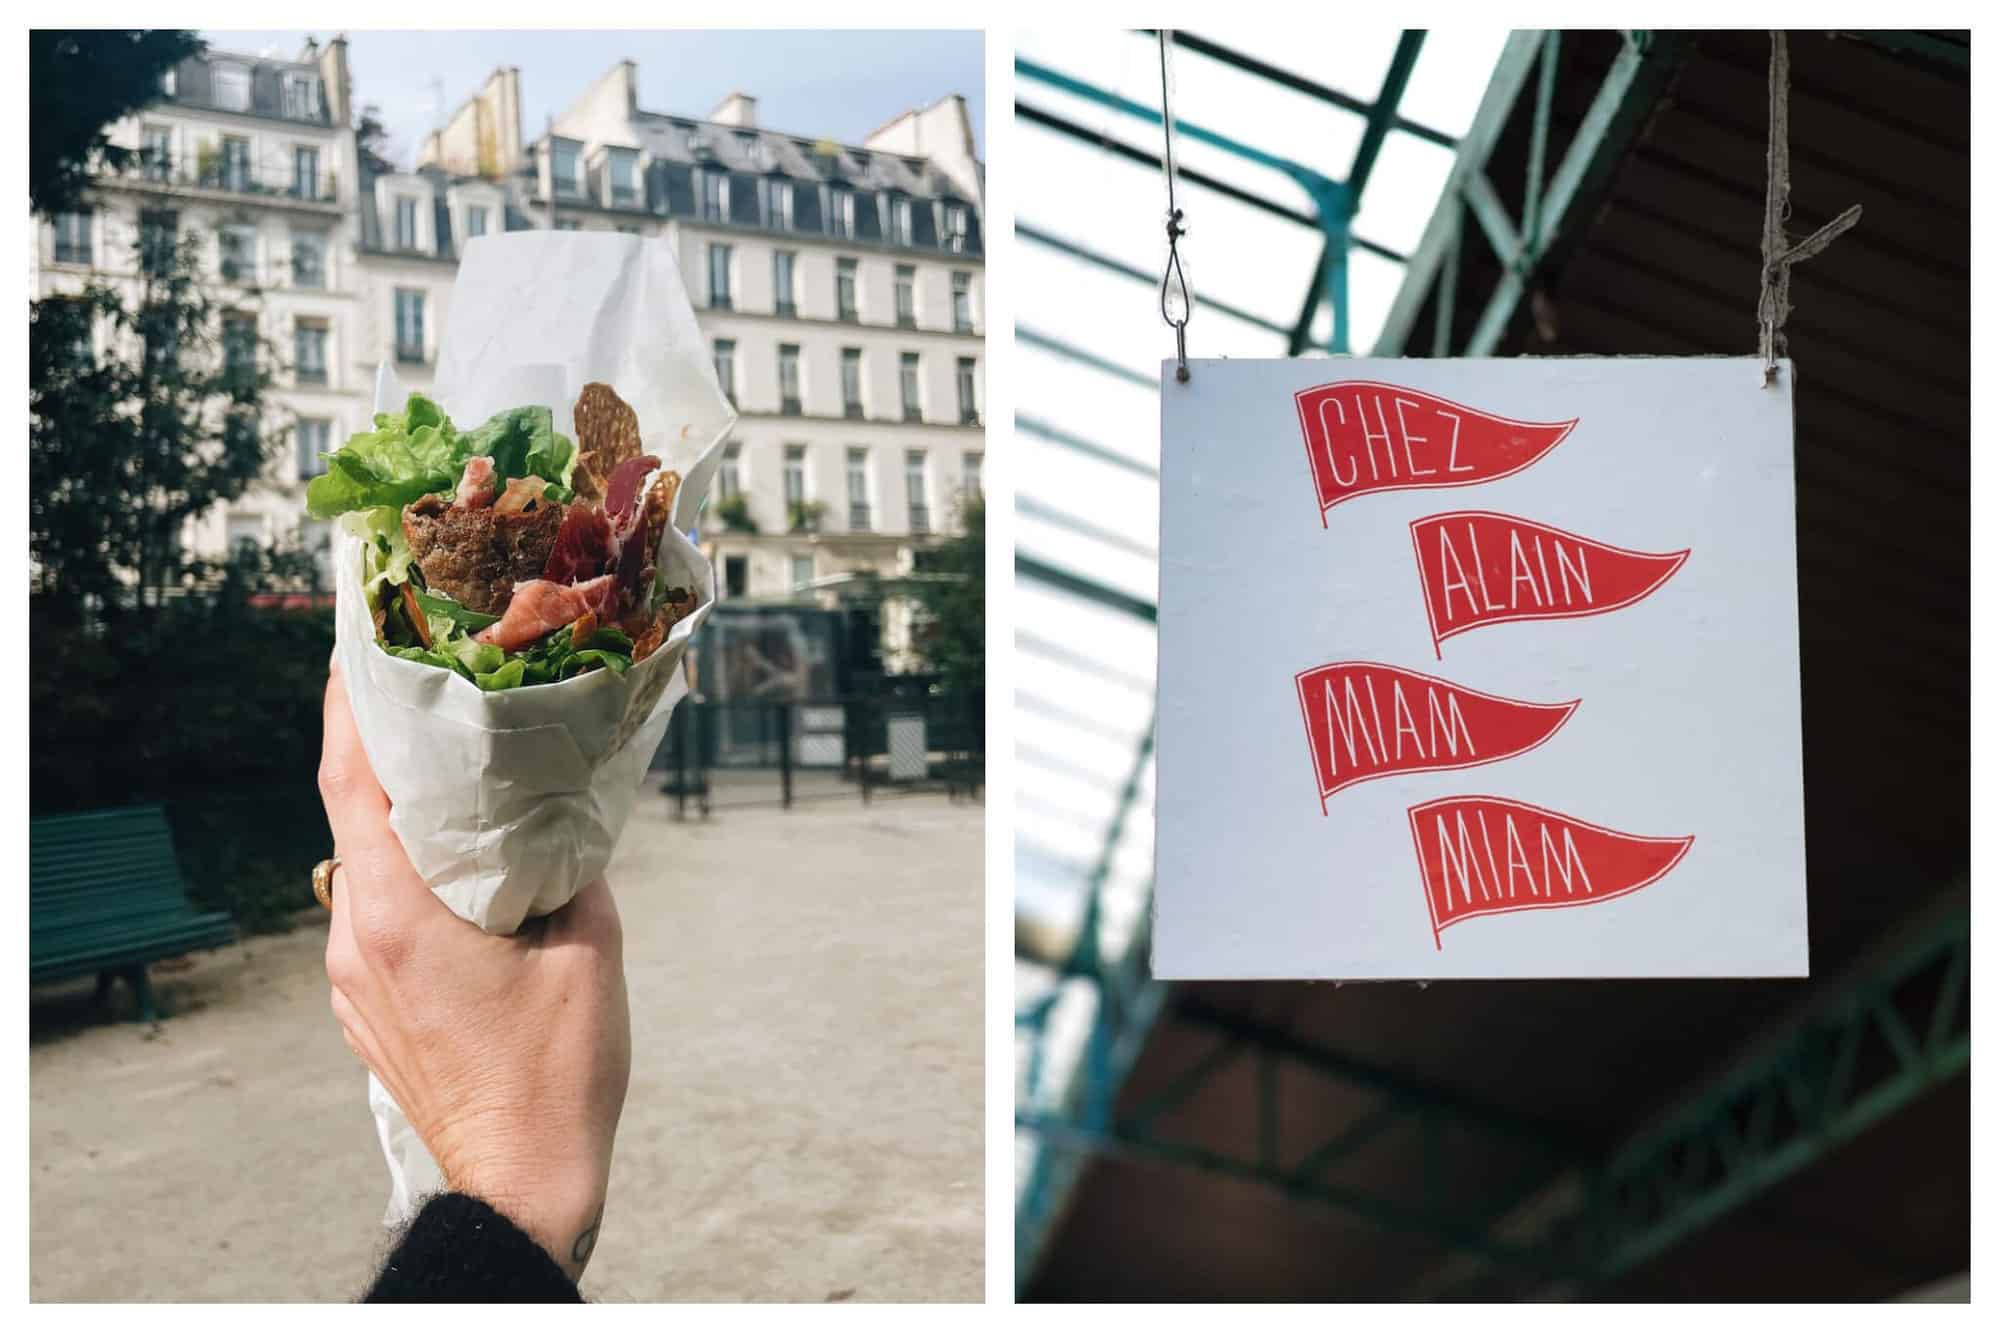 Left: a savoury crepe from Chez Alain Miam Miam being held up in front of Parisian buildings in a park. Right: the sign for Chez Alain Miam Miam at Marché des Enfants Rouges.